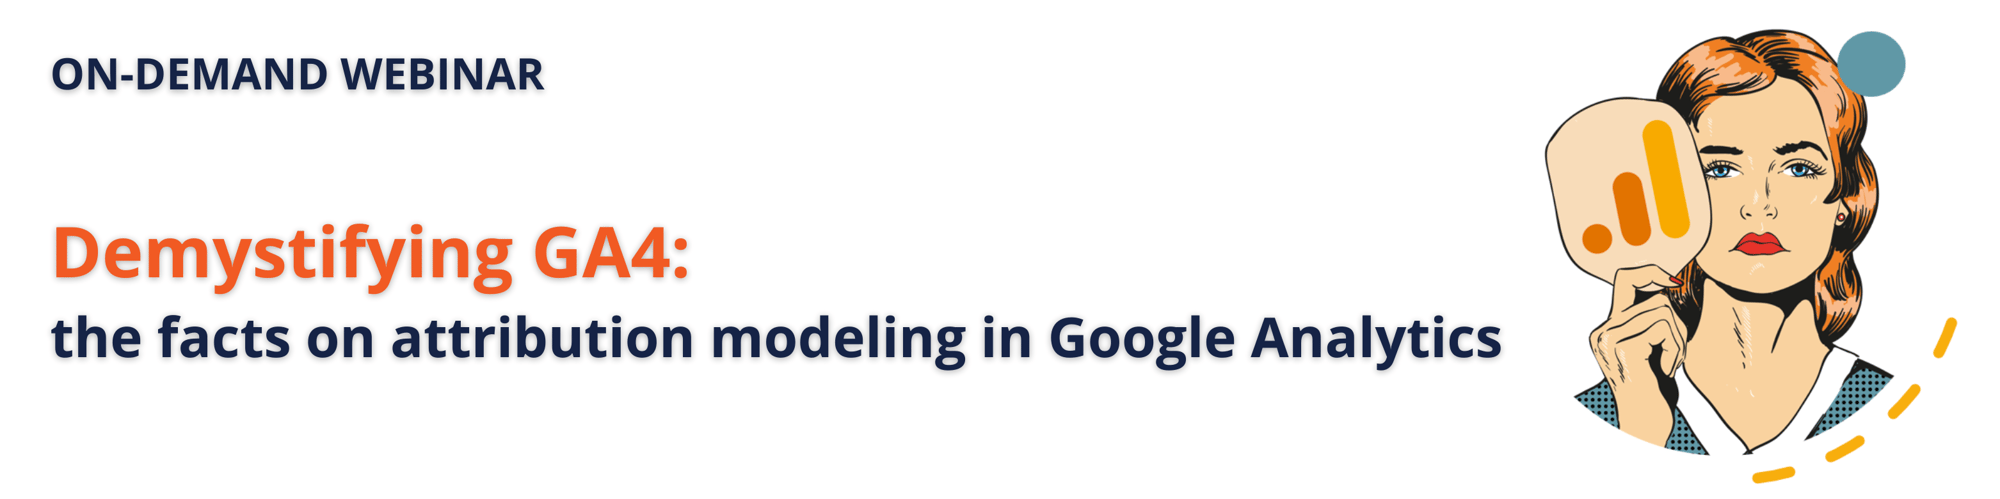 Demystifying GA4 the facts on attribution modeling in Google Analytics (1000 x 250 px) (3)